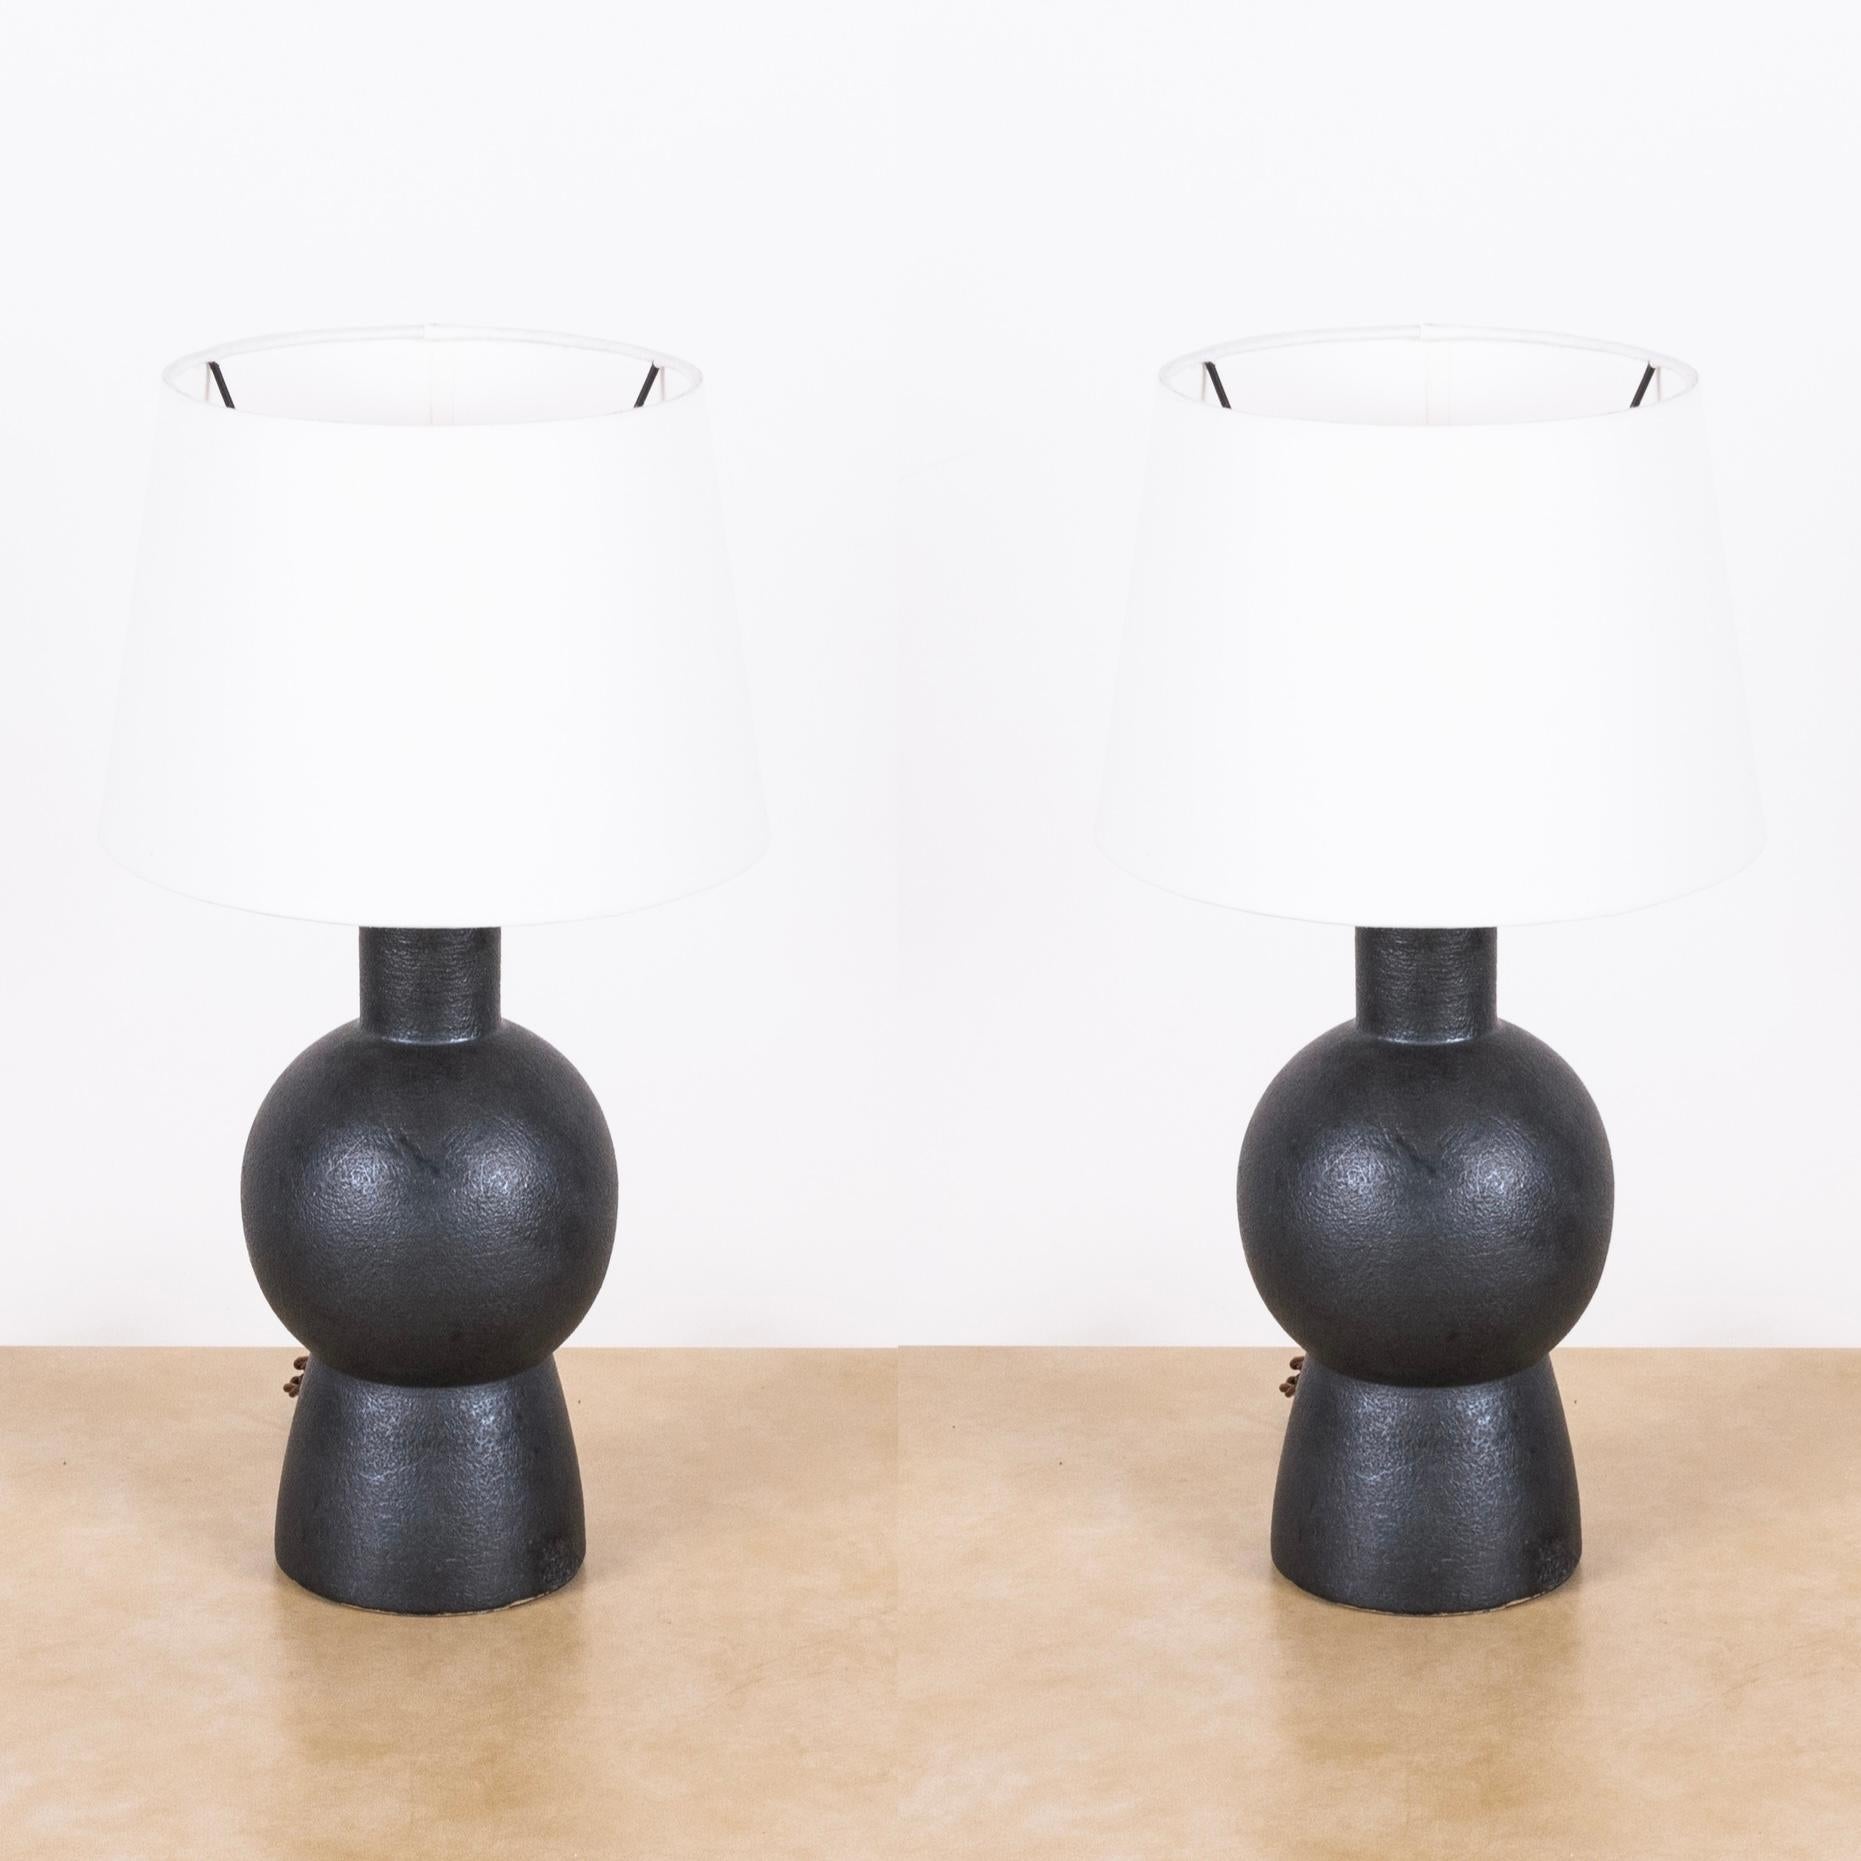 Pair of black 'Bilboquet' stoneware lamps by Design Frères.

Dimensions listed (10 in. diameter x 18 in. tall) are the overall dimensions of the lamps plus the shades (as pictured). The lamp bases are 11 in. tall and the shades are 7 in. tall.